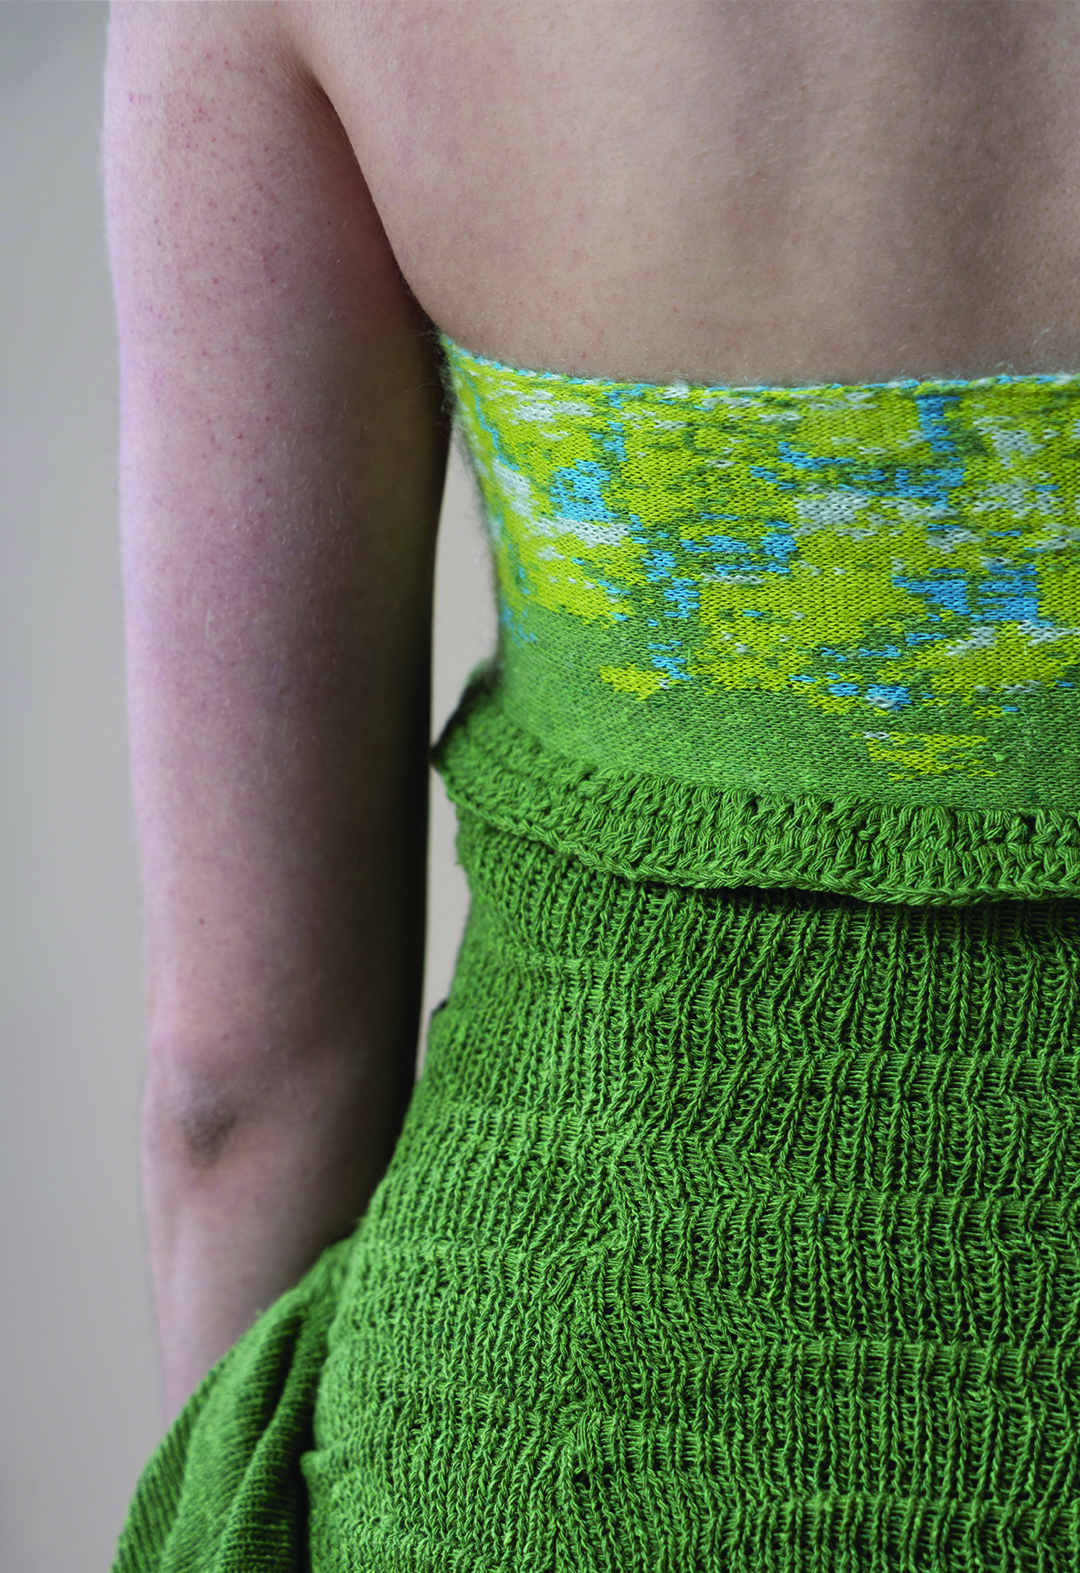 Close-up view of the left side of the model's back, showing the detail of the tube top, consisting of a green, yellow, sky-blue, and white abstract pattern; part of the bumpy bodice; and the side flare trim.